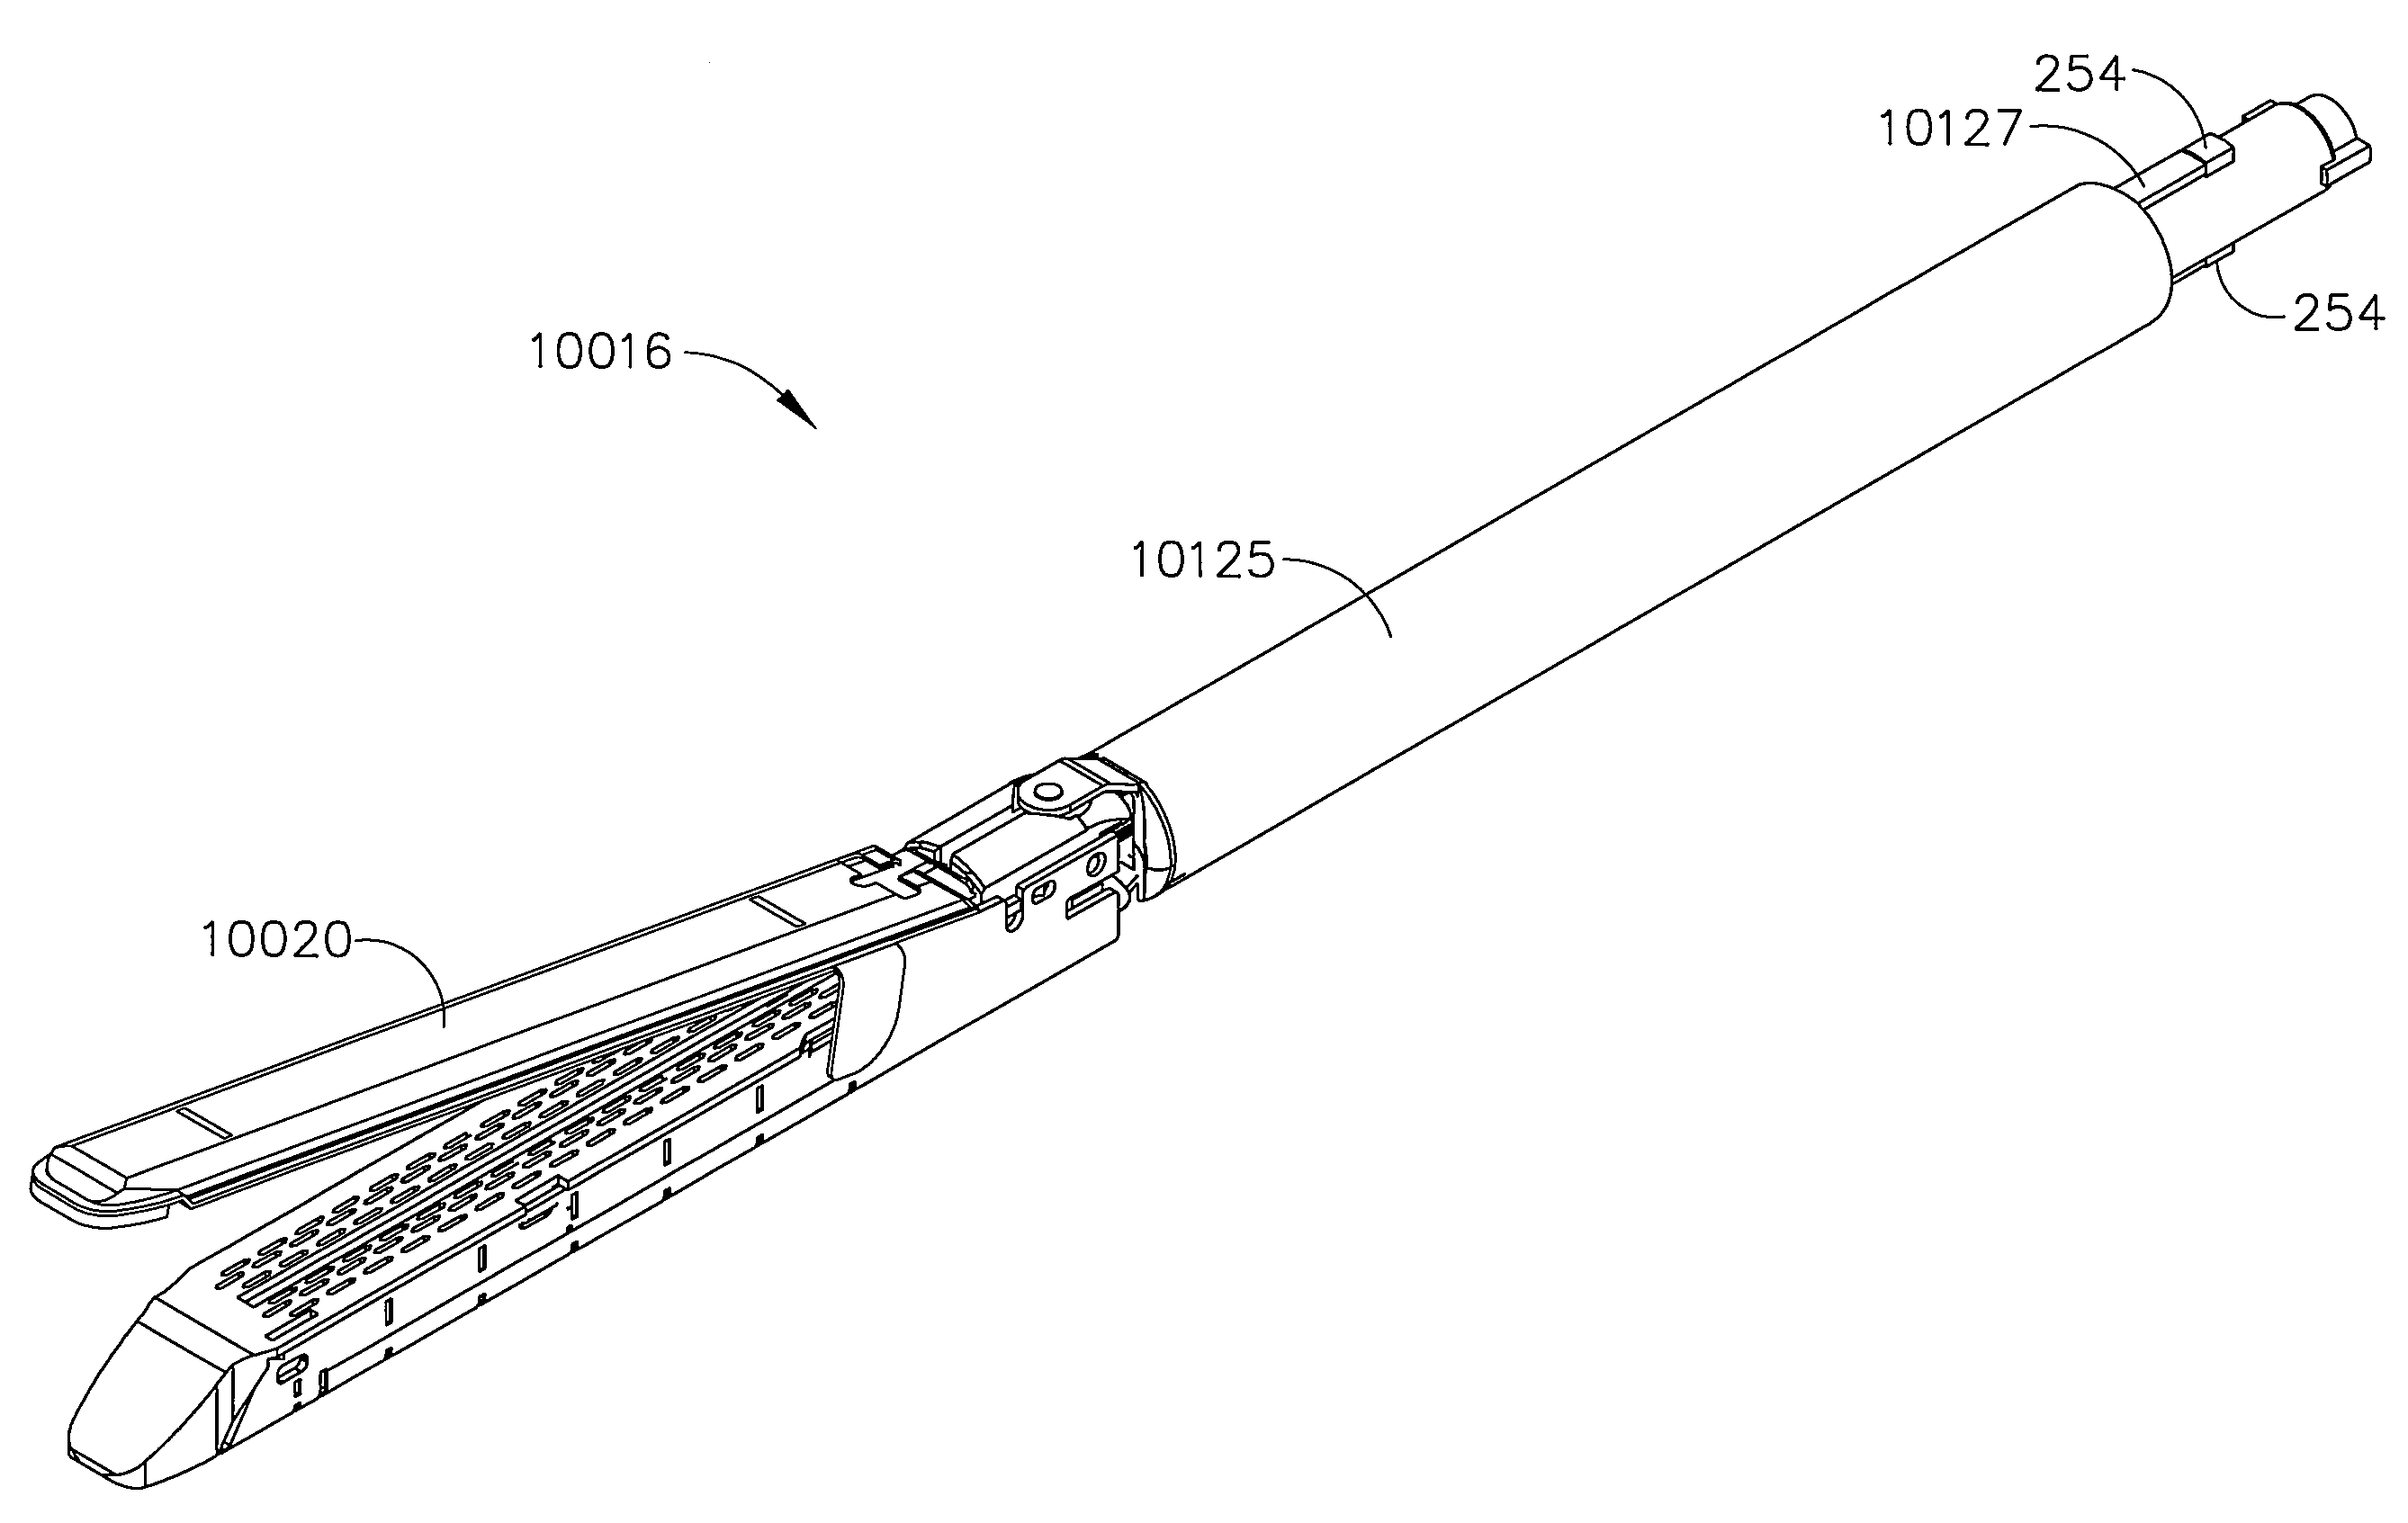 End effector coupling arrangements for a surgical cutting and stapling instrument